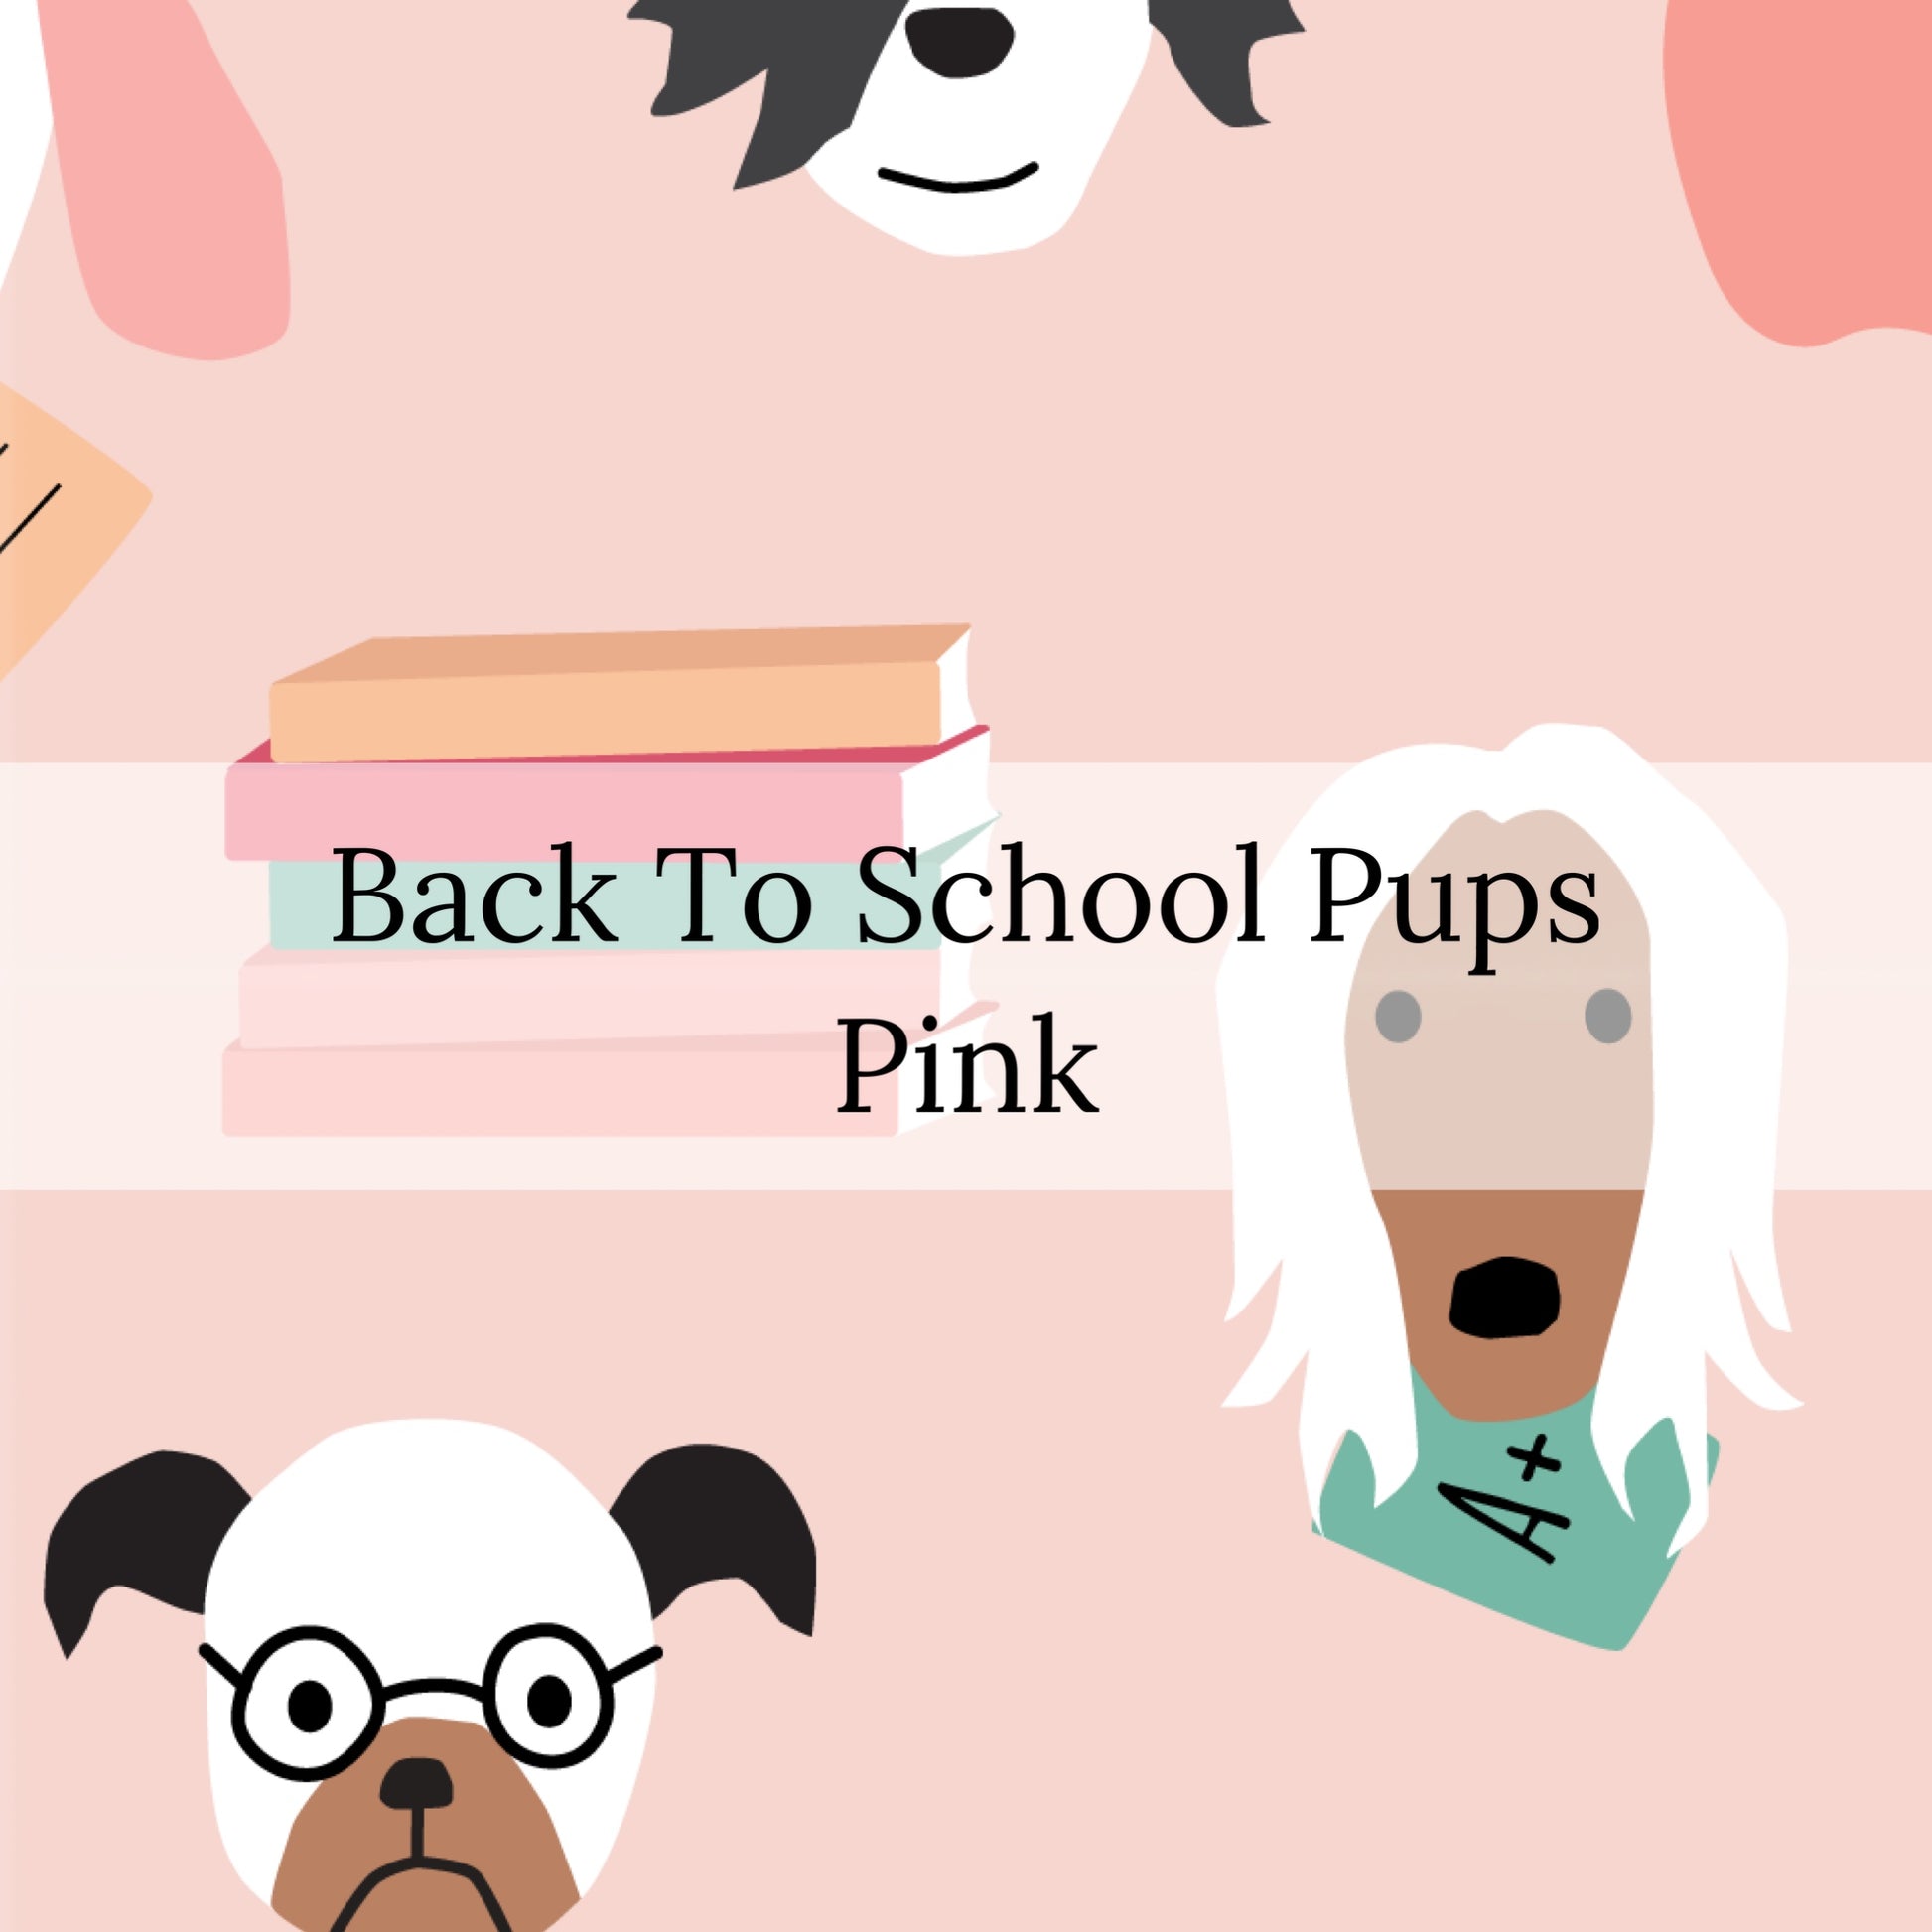 Pink and cream school supply themed high quality fabric adaptable for all your crafting needs. Make cute baby headwraps, fun girl hairbows, knotted headbands for adults or kids, clothing, and more!